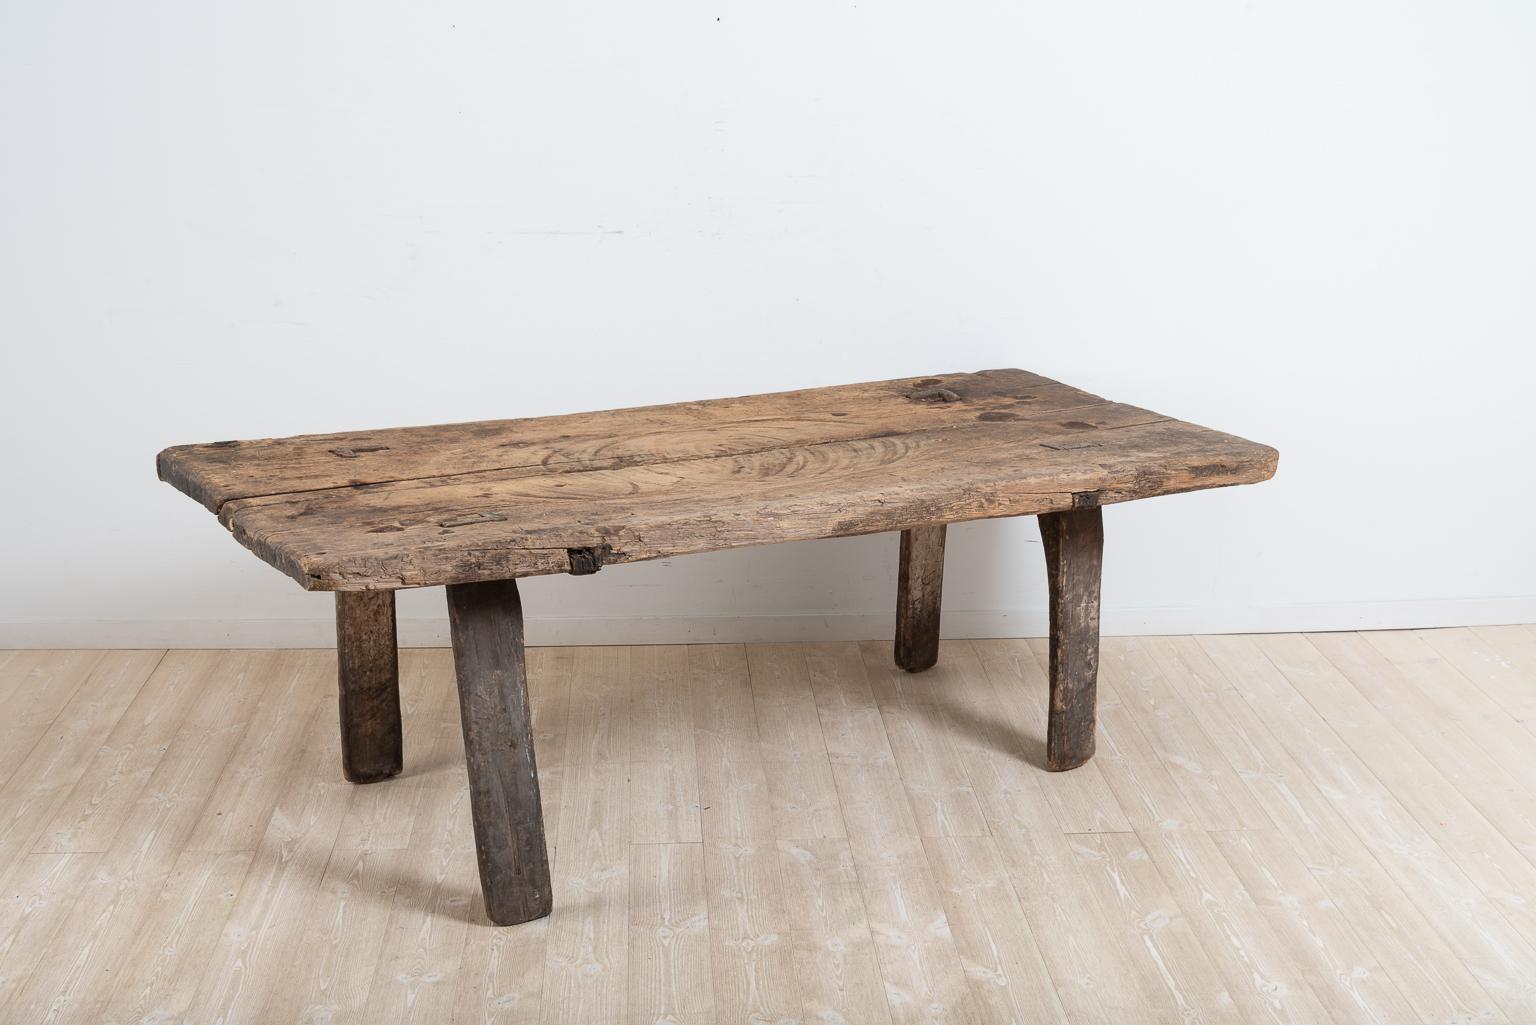 Primitive and rustic Folk Art table, a so called ‘Hednabord’. Unique and untouched. The model is the first type of freestanding tables ever made and is therefore very old. The table was manufactured before they knew how to saw timber. The tabletop’s